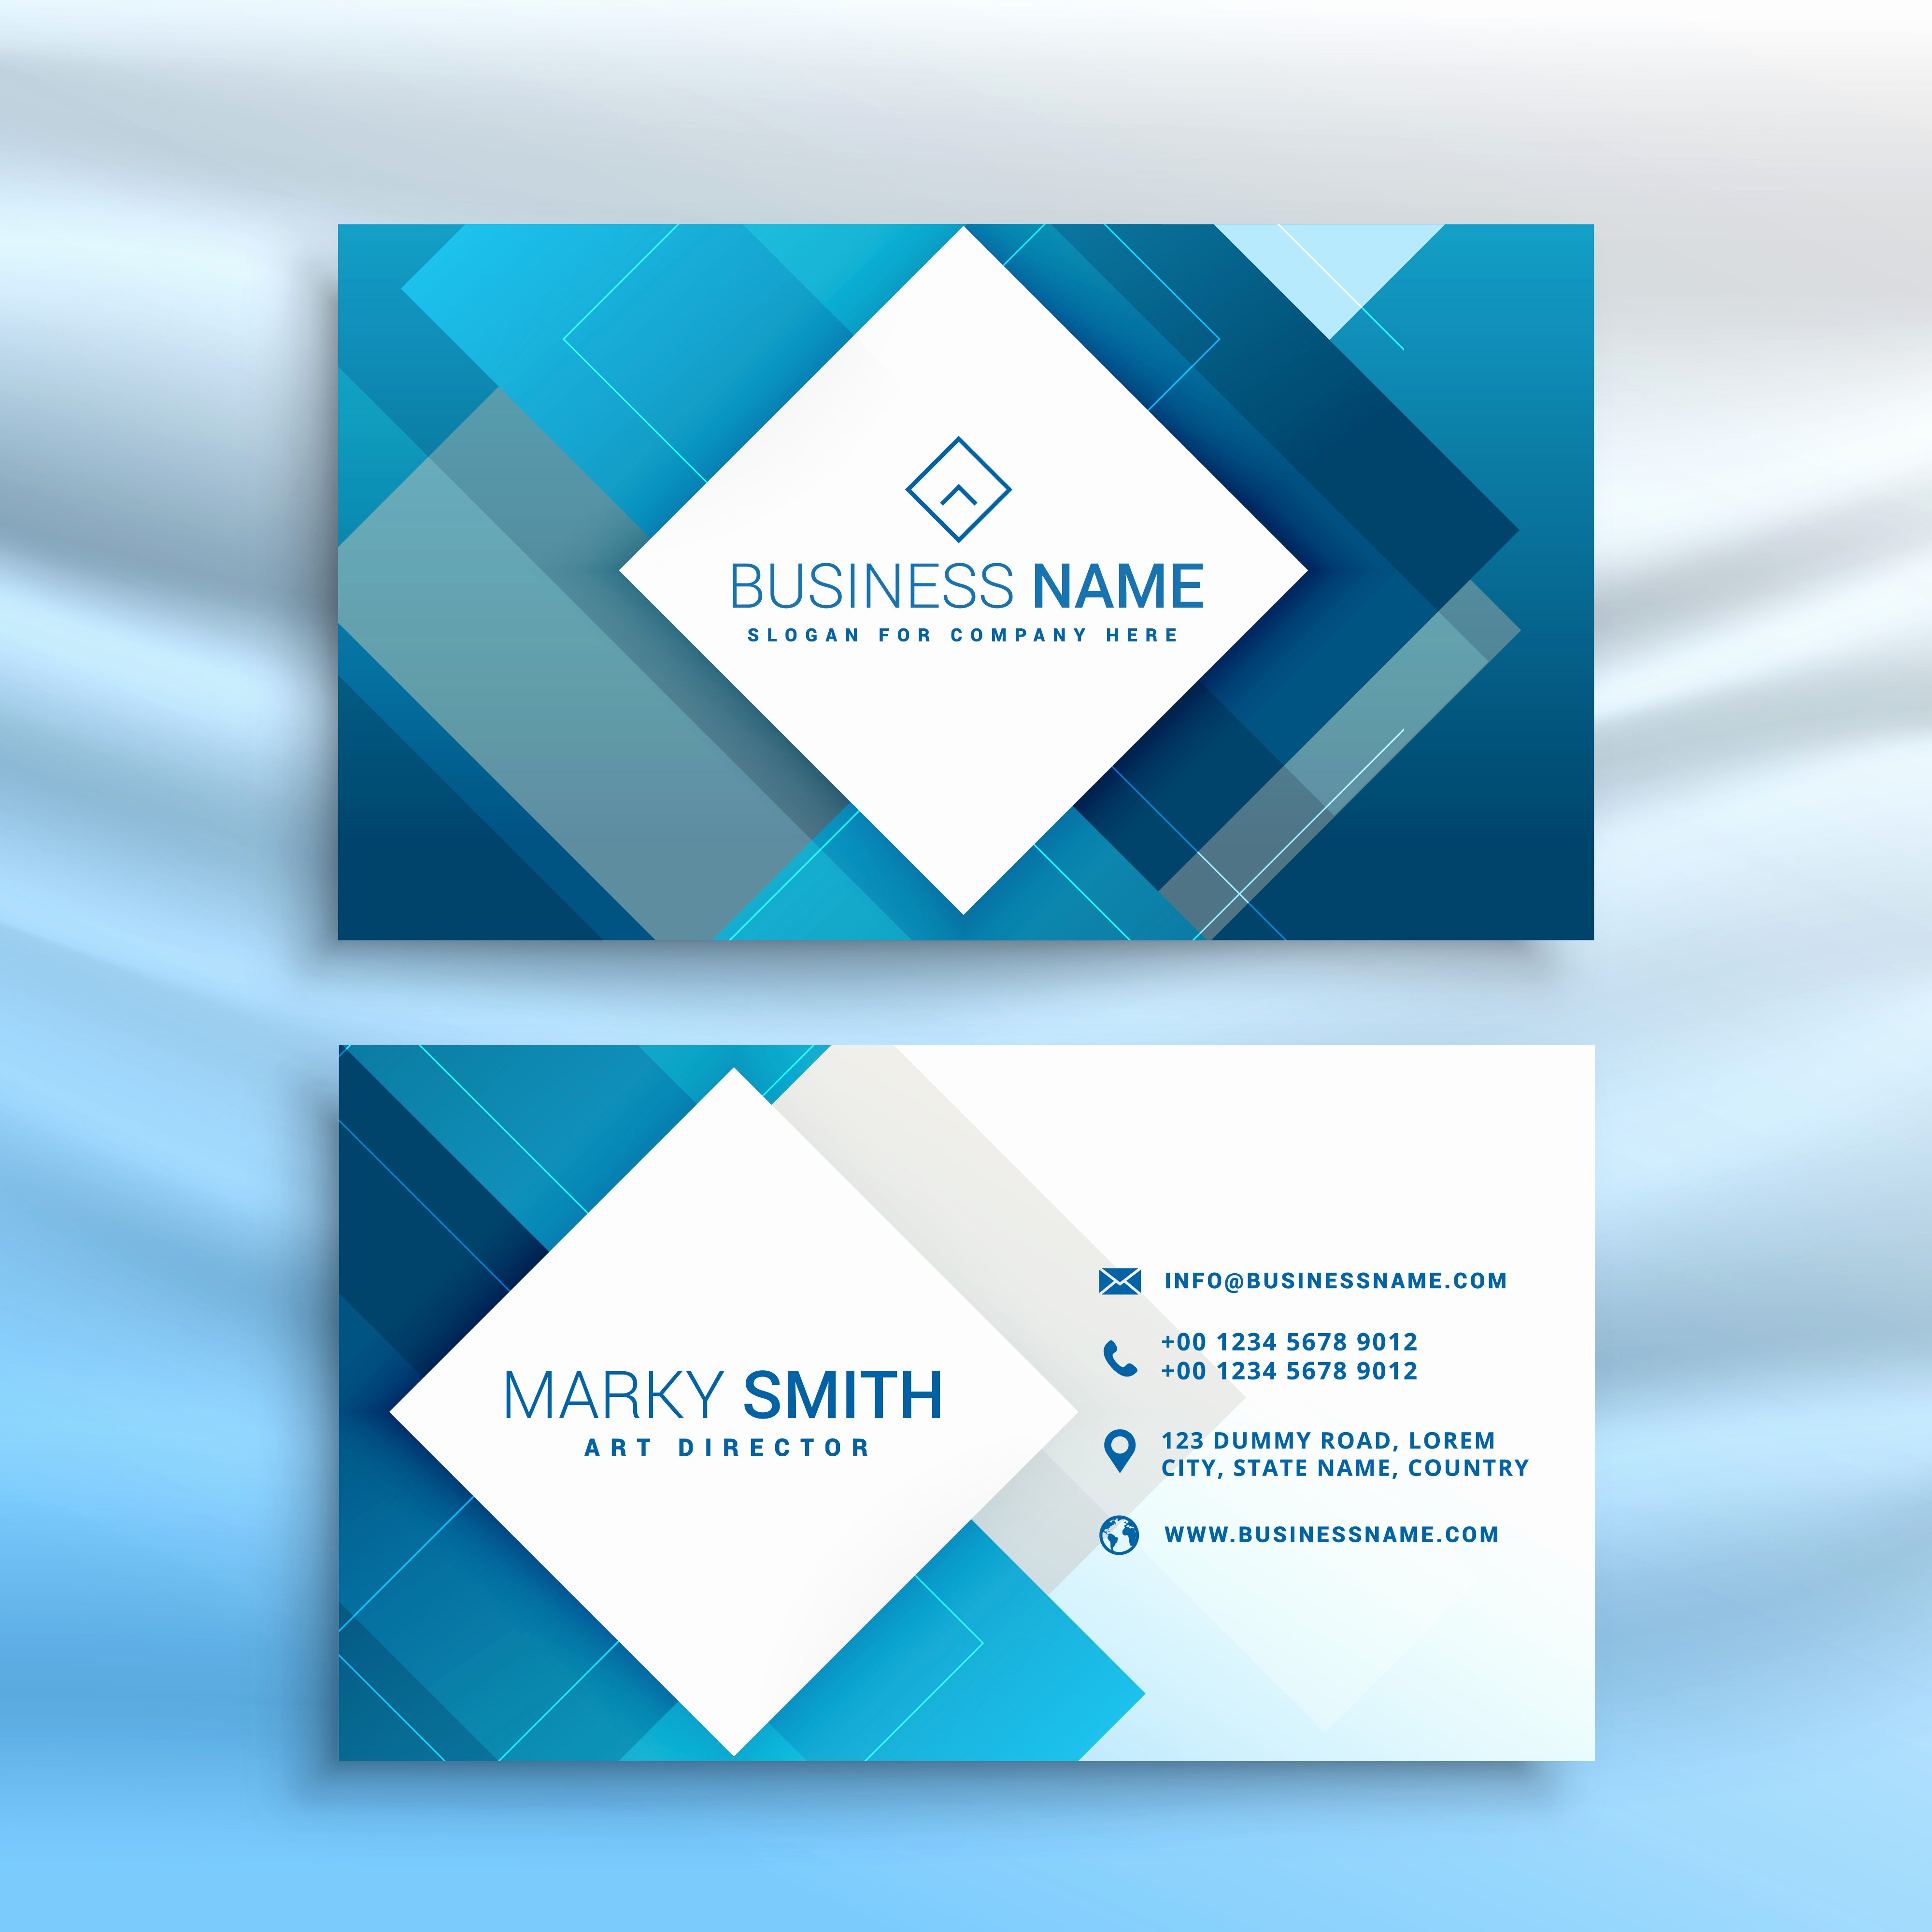 Business Card Images Free Inspirational Blue Abstract Business Card Modern Template Download